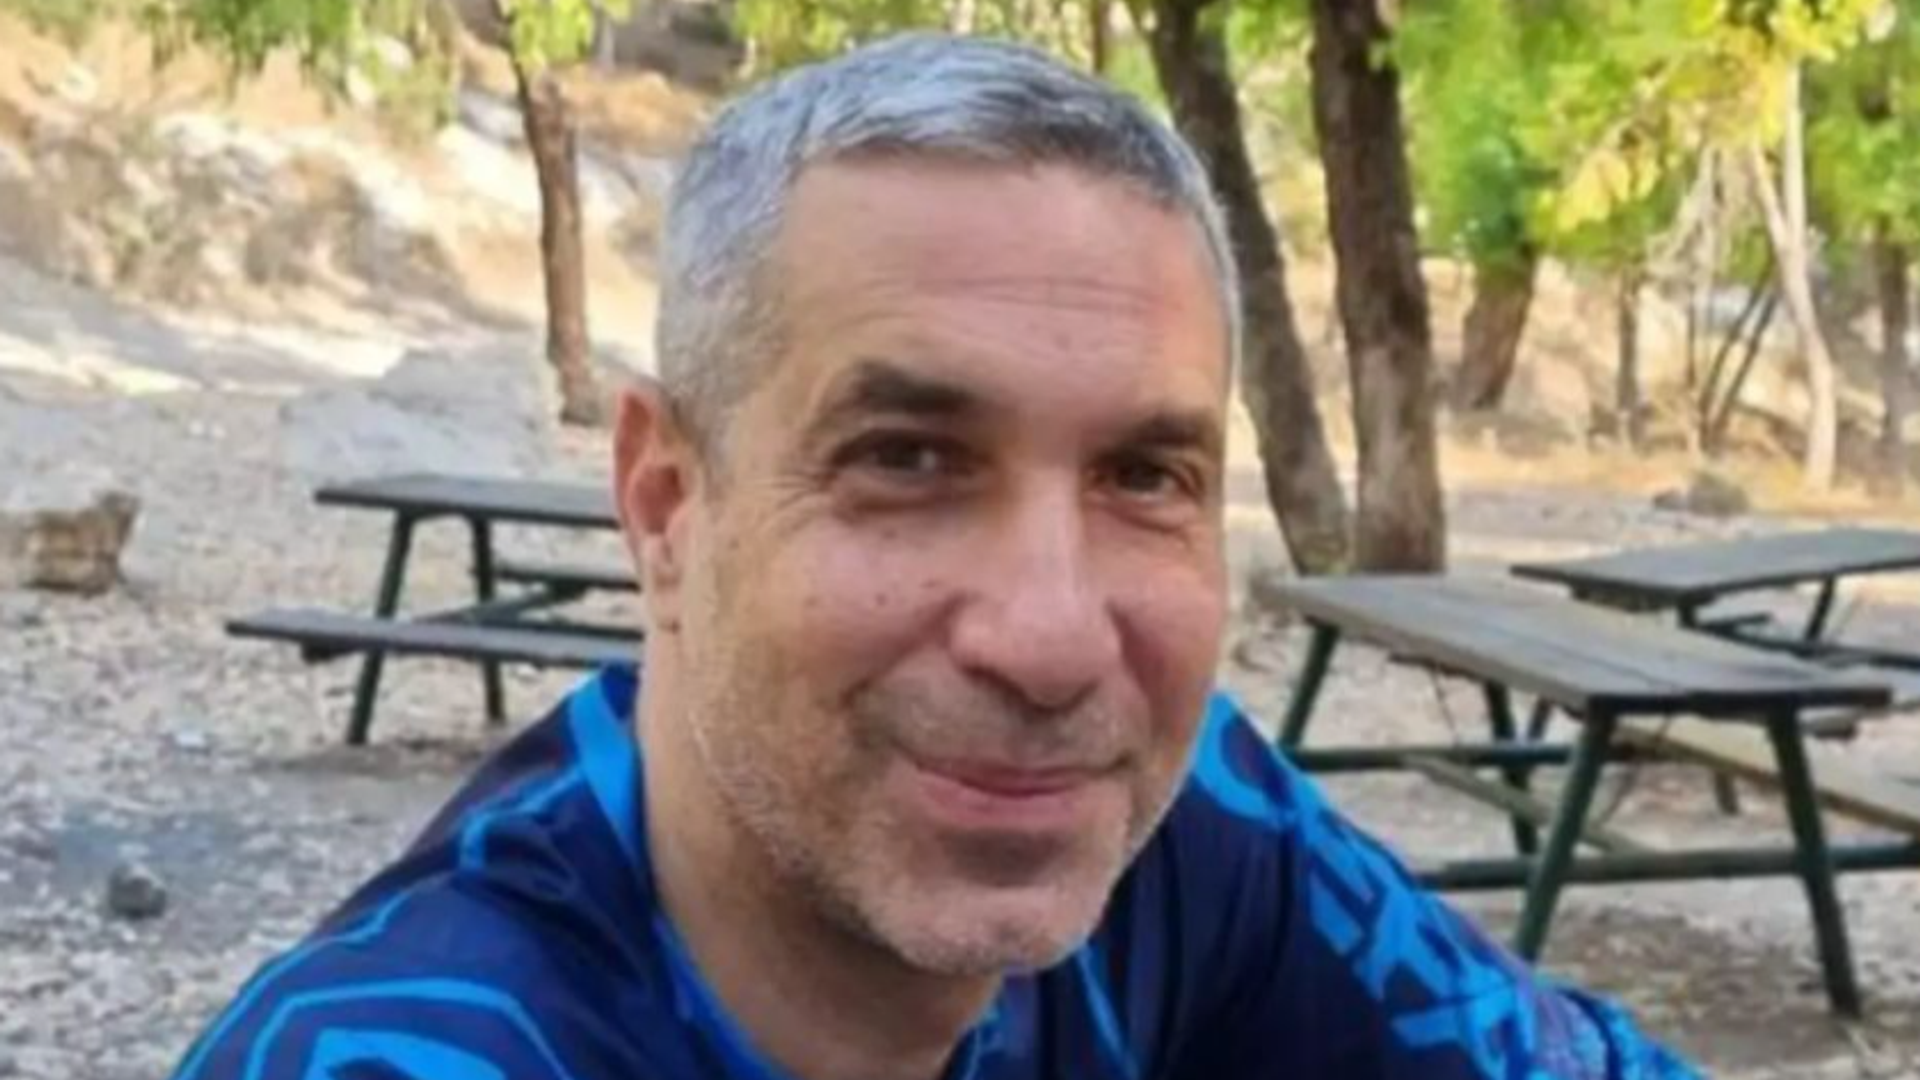 Body of Israeli hostage kidnapped during cycling trip on 7 October found in Gaza, IDF says...